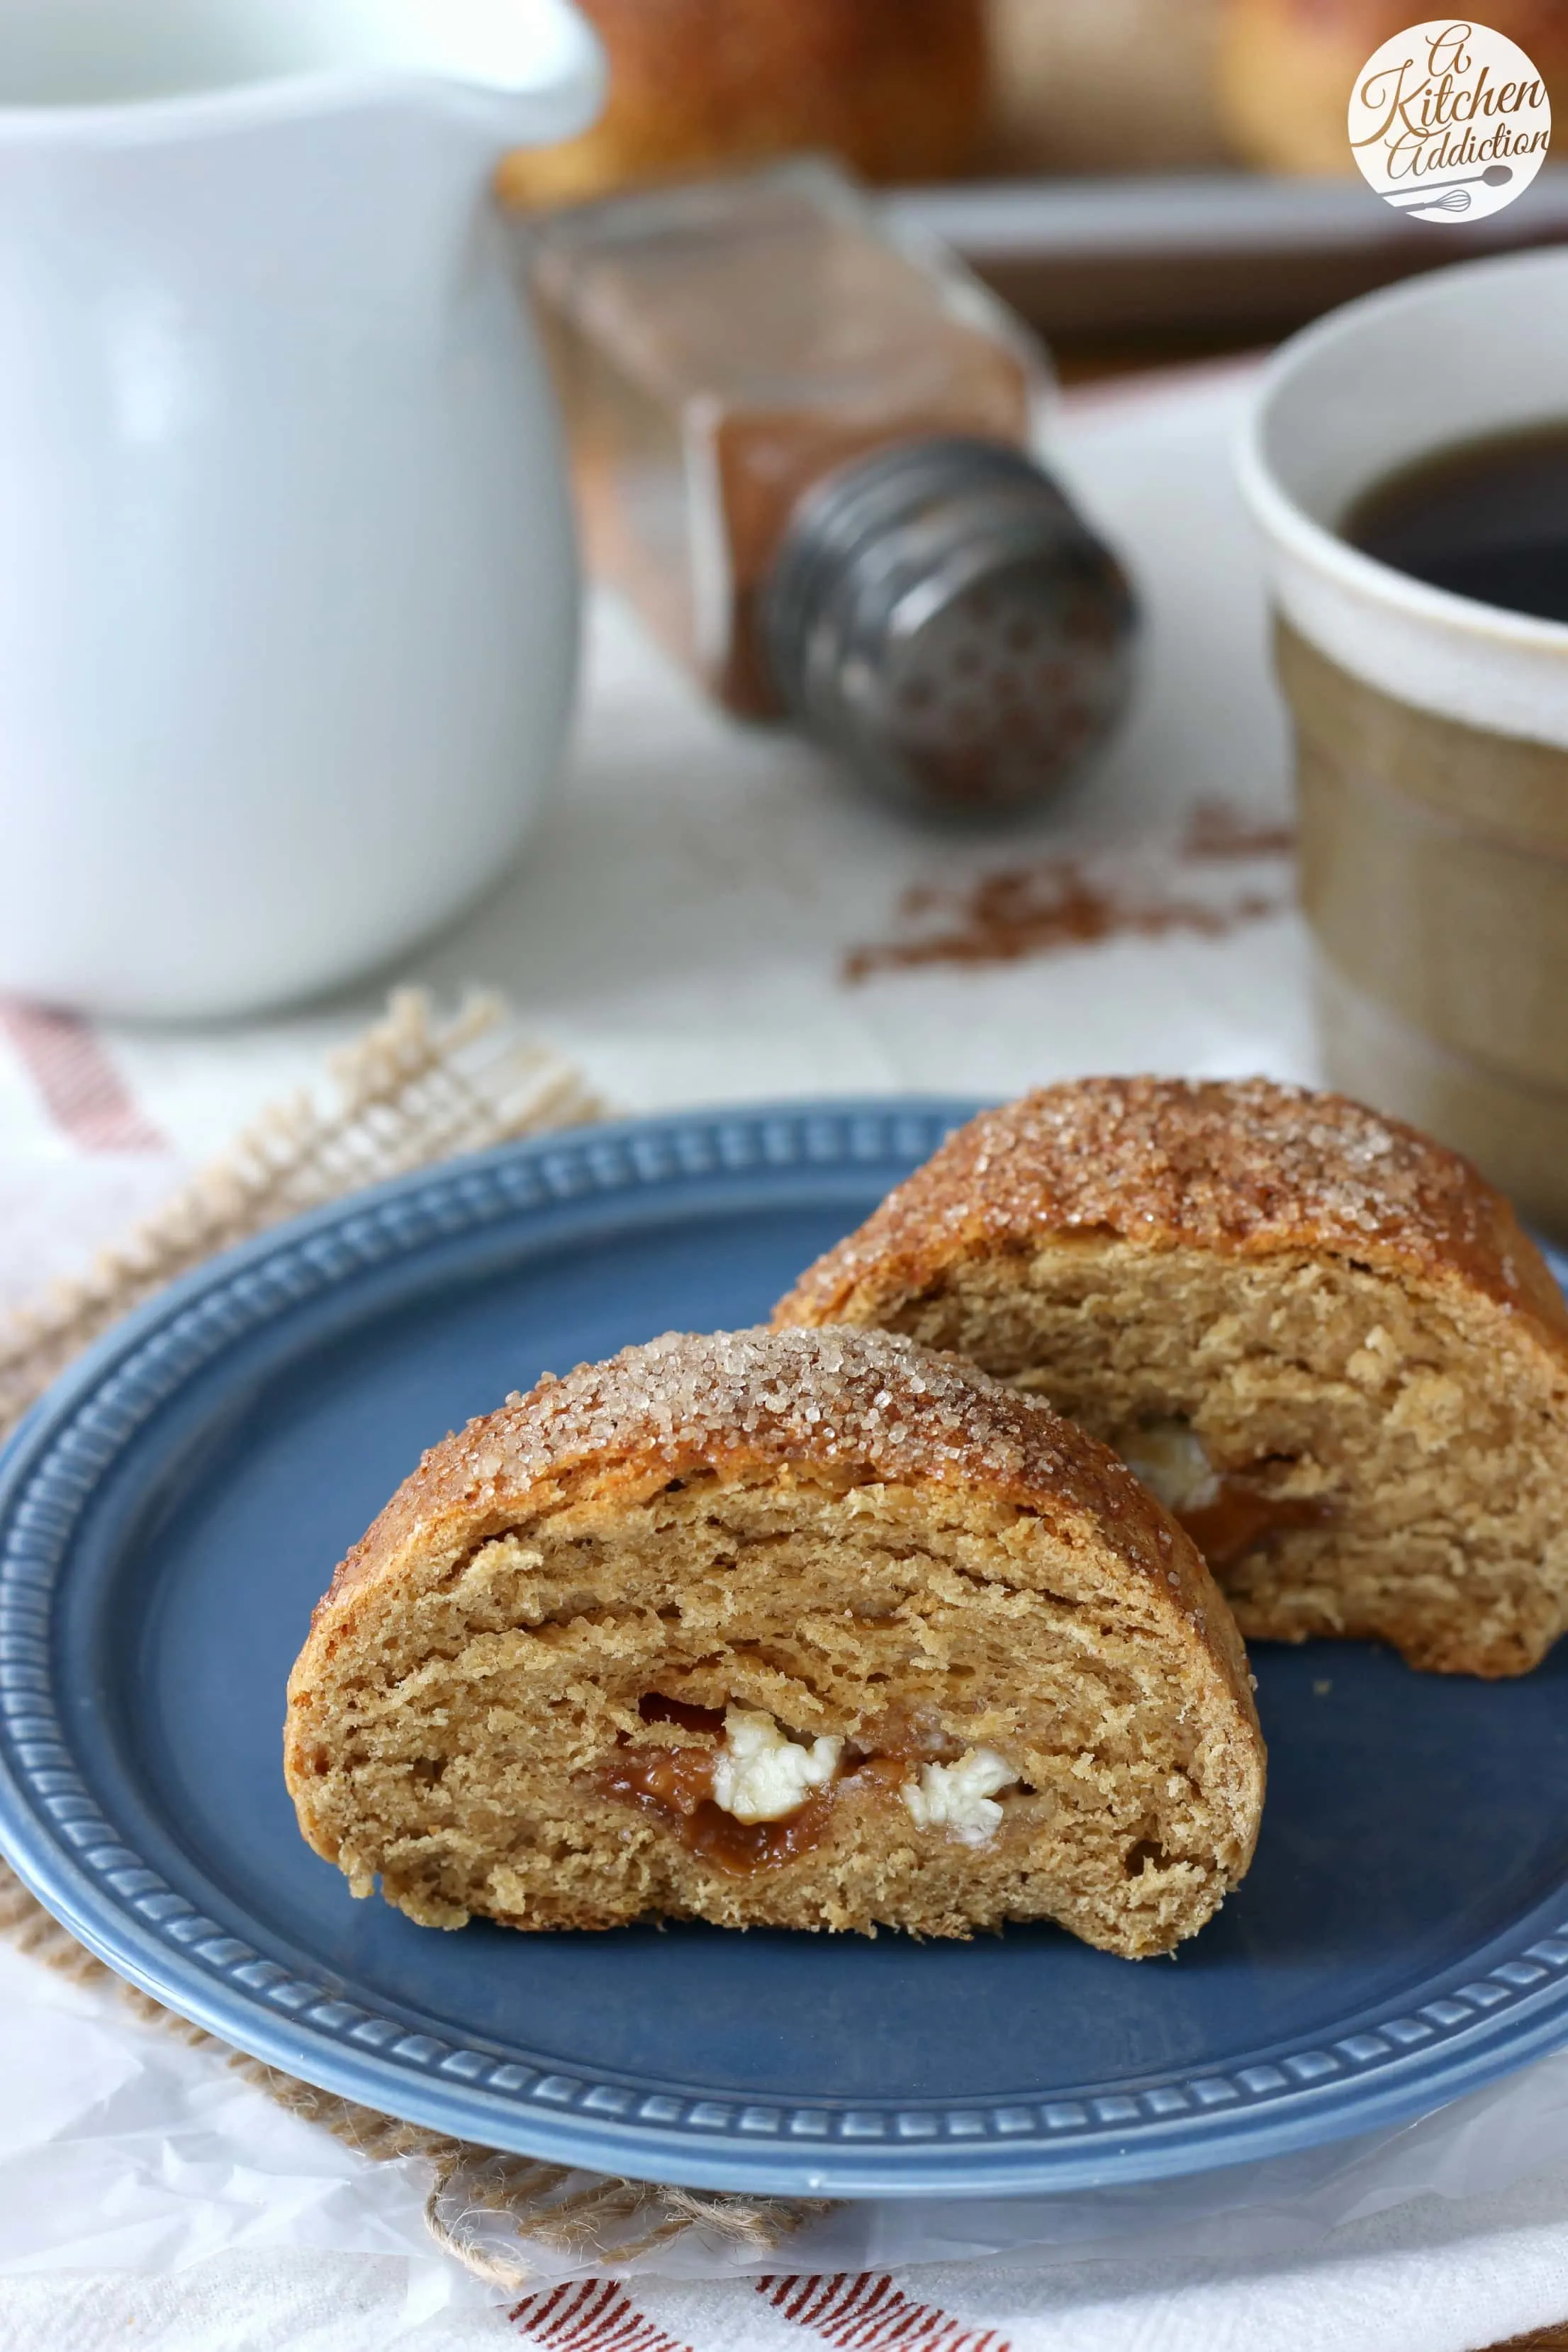 Gingerbread Brioche Rolls filled with white chocolate and caramel bits from A Kitchen Addiction